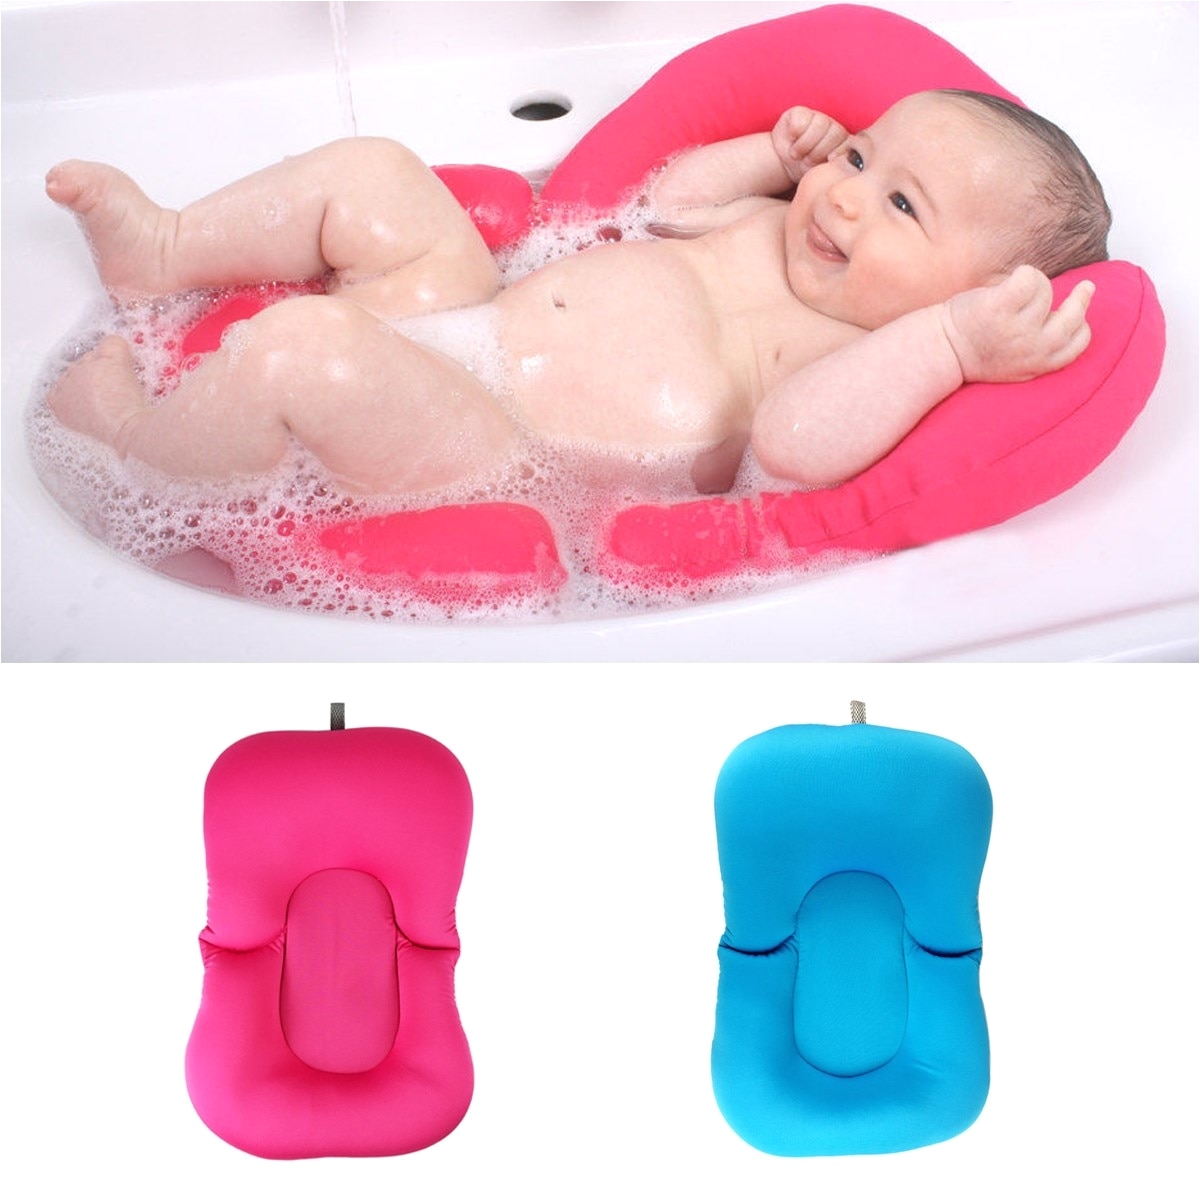 2 colors elastic fabric baby bath tub air cushion lounger pillow pad floating soft seat infant newborn bath shower products in baby tubs from mother kids